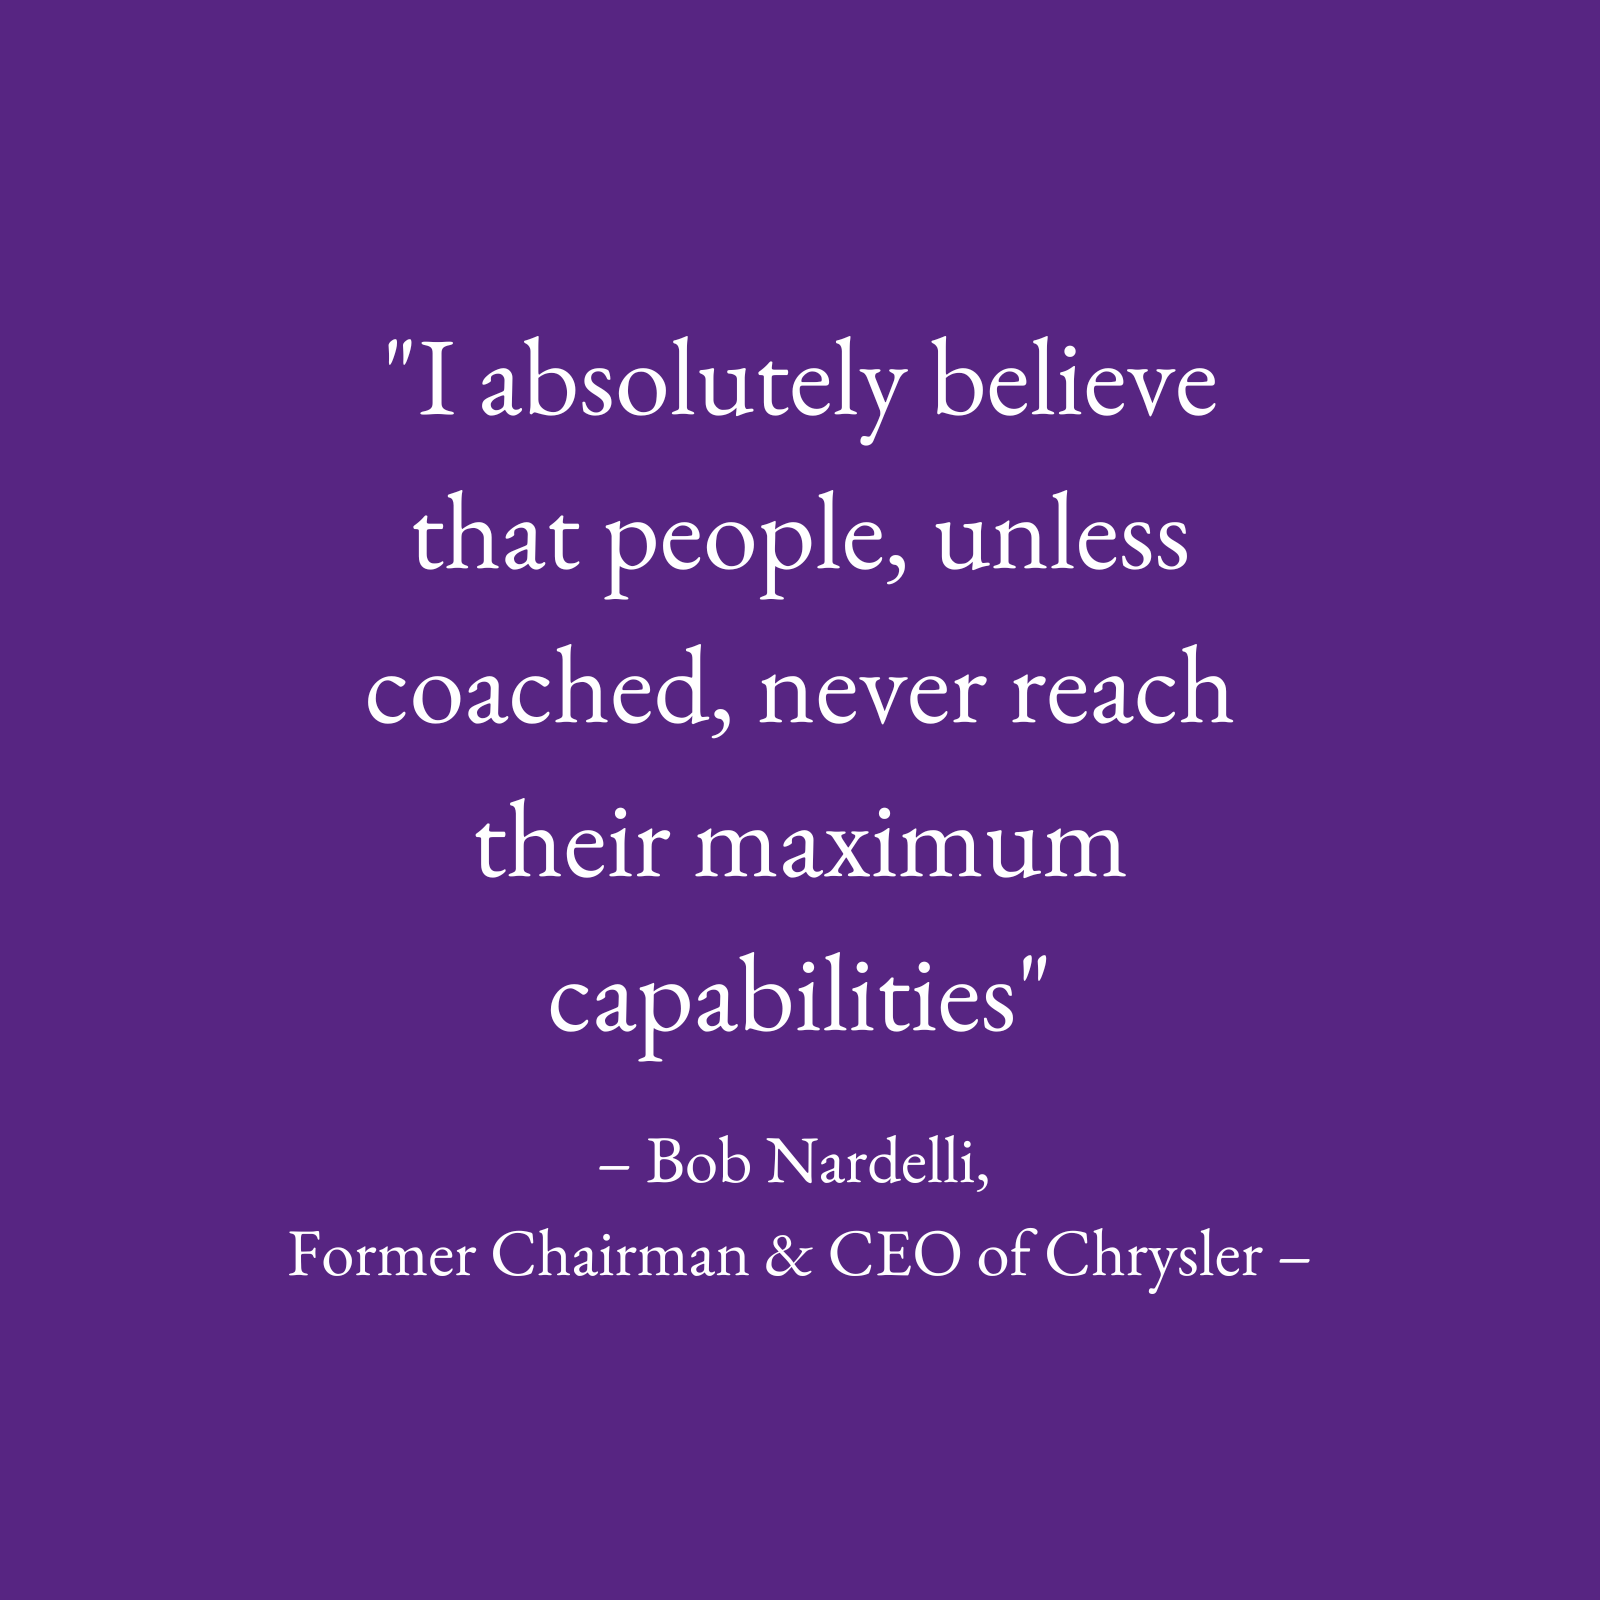 Image text only- "I absolutely believe that people, unless coached, never reach their maximum capabilities" Bob Nardelli, Former Chairman & CEO of Chrysler